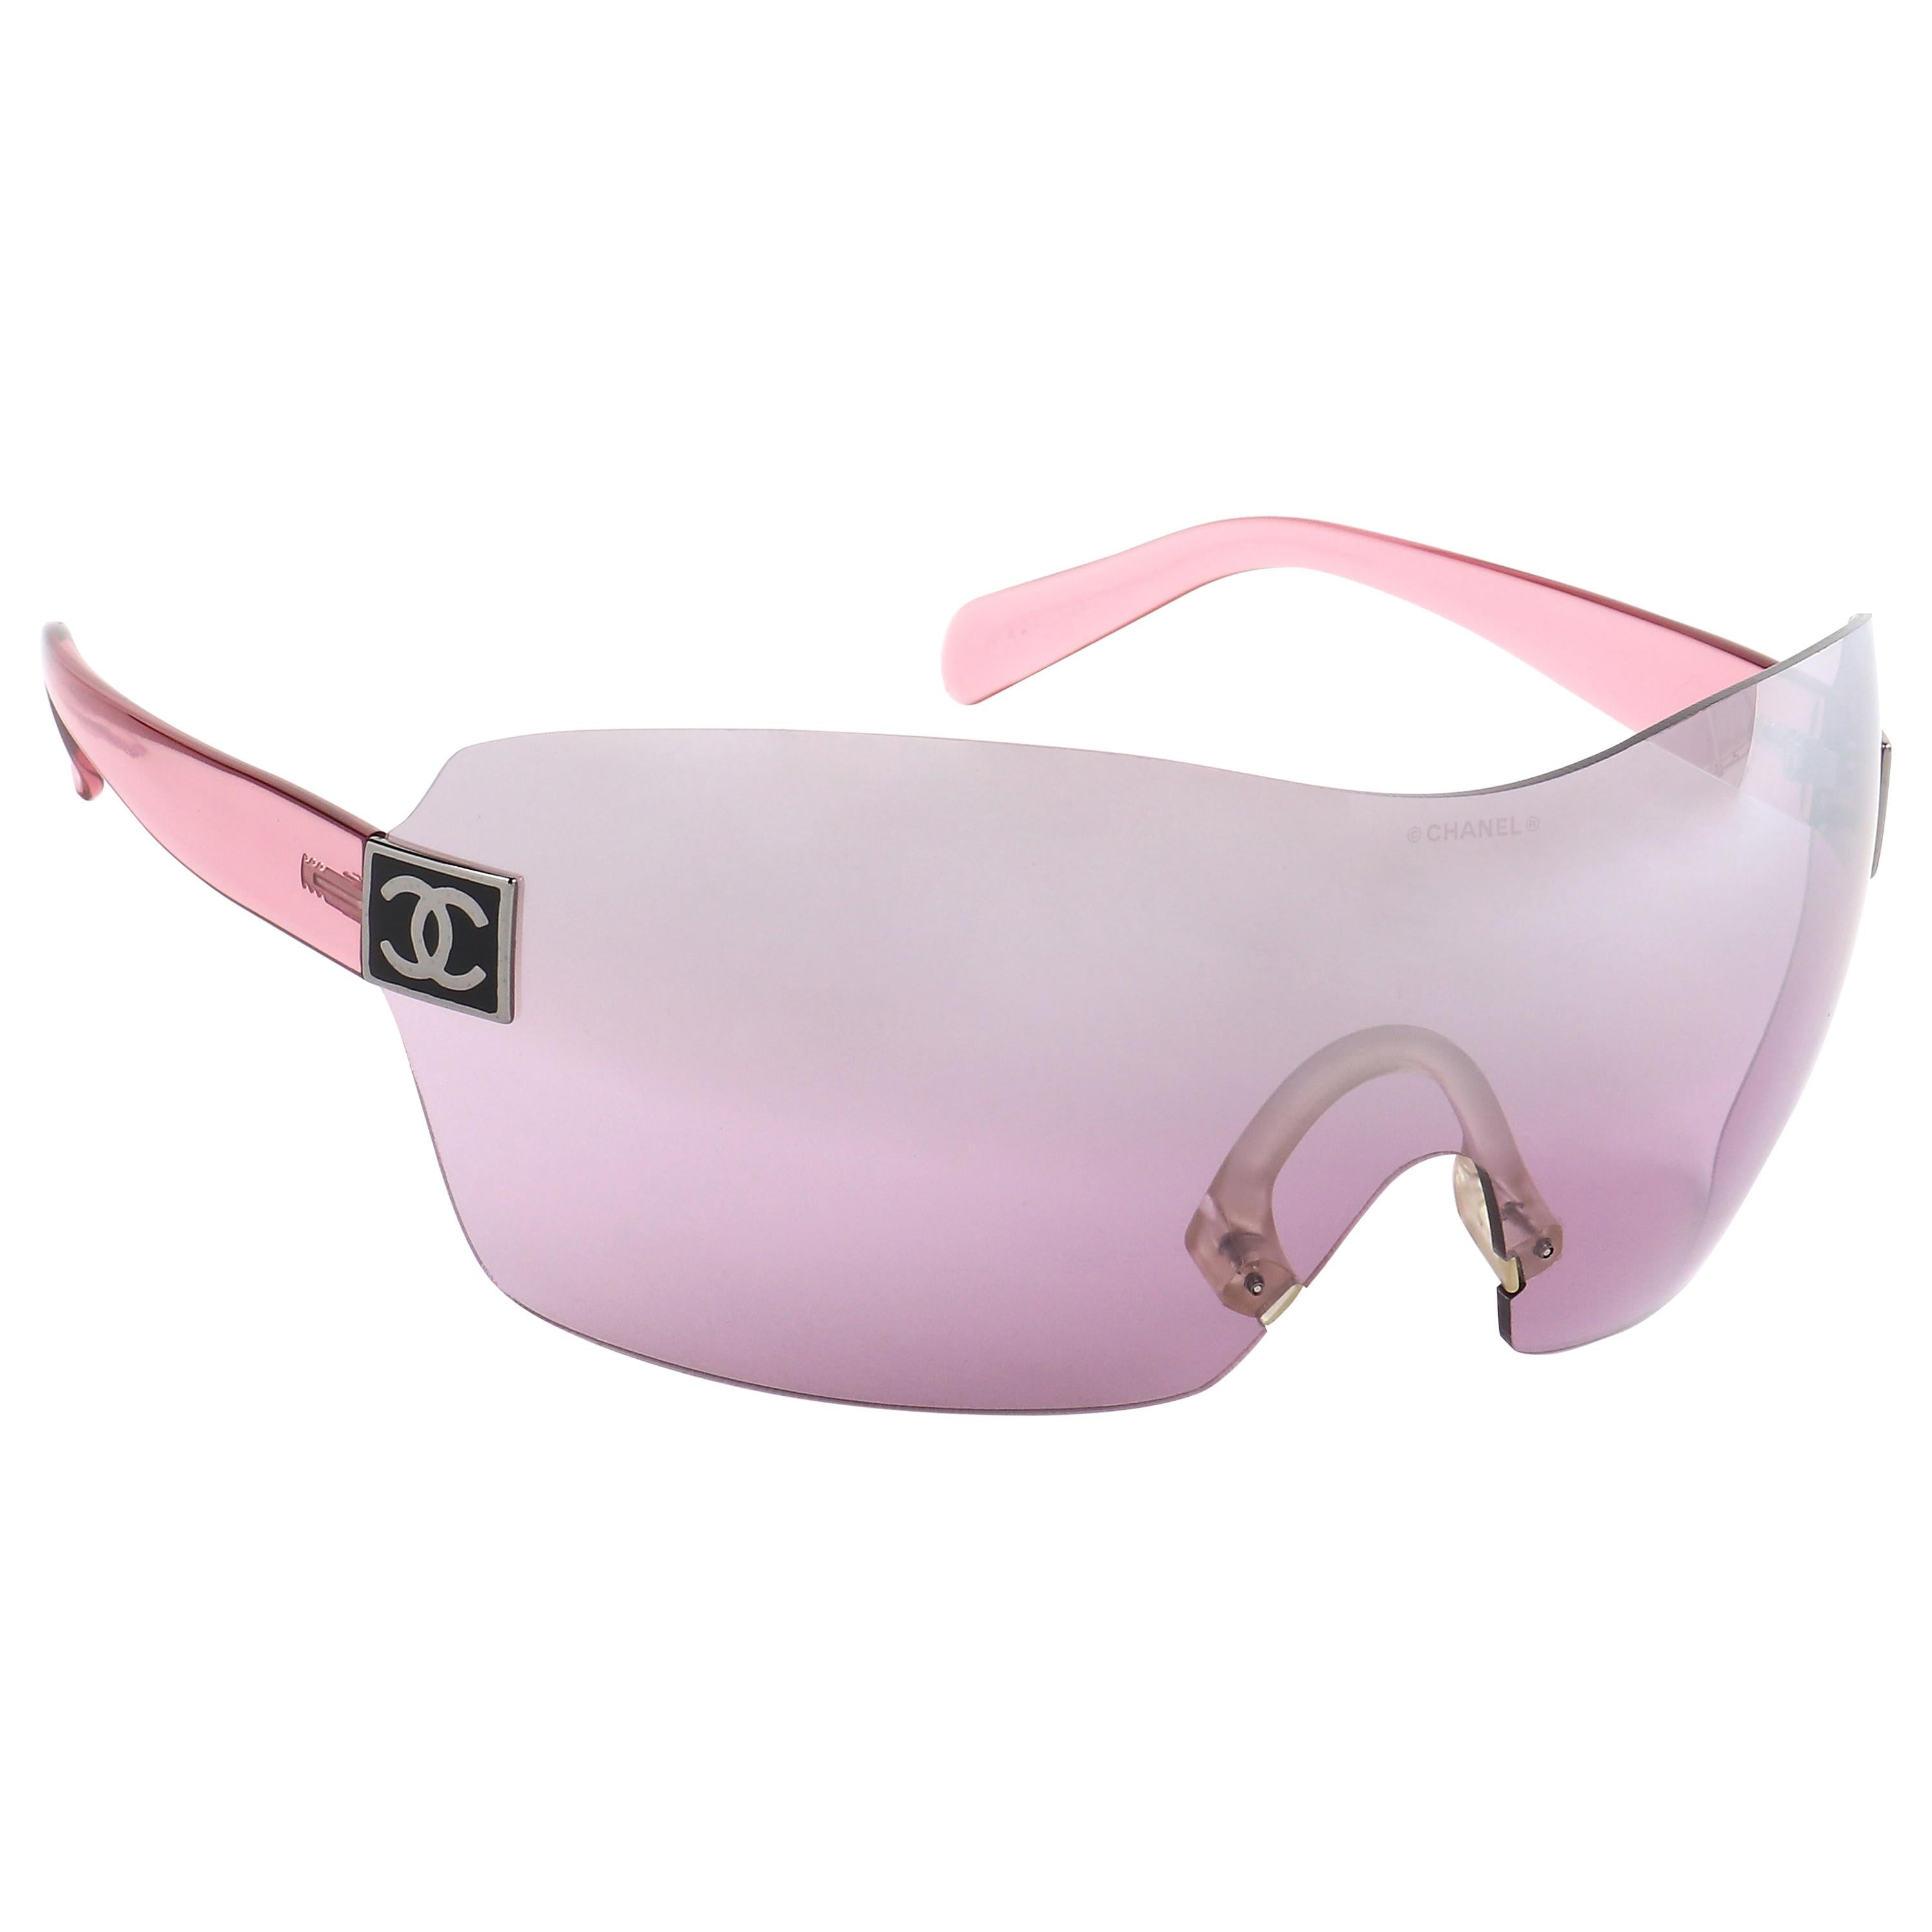 Chanel Rimless Tinted Pink Sunglasses